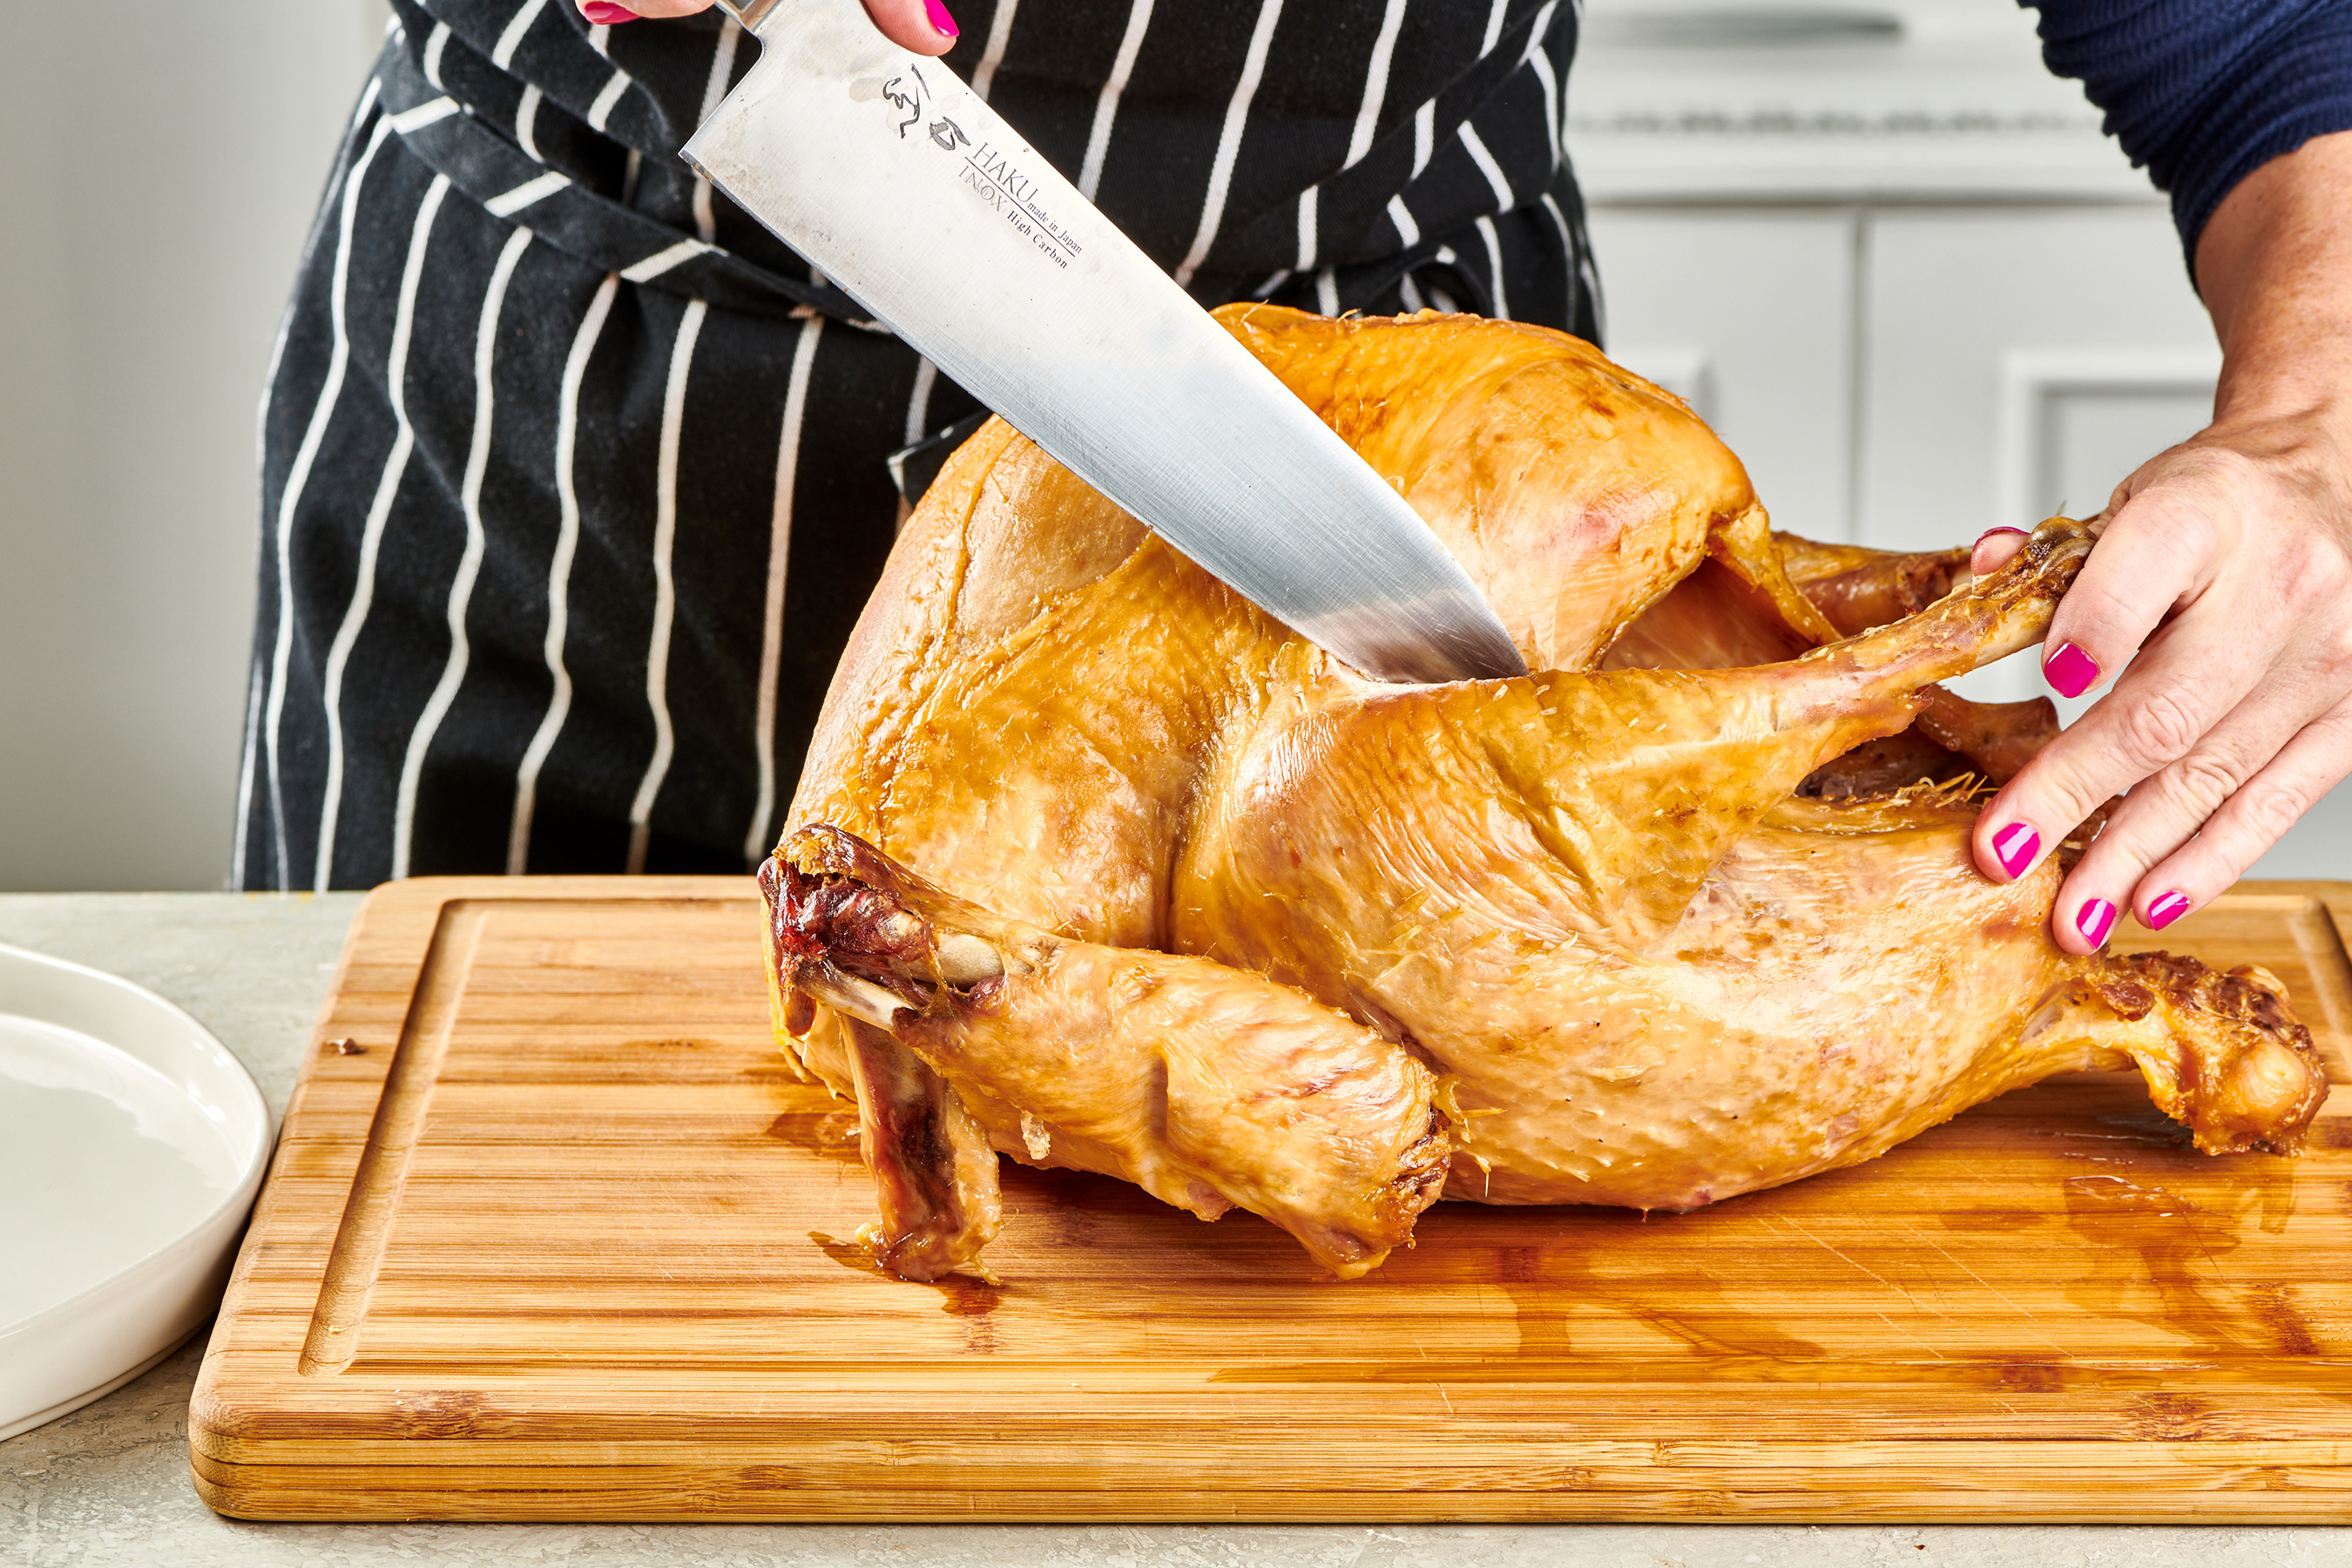 Thanksgiving 101 has a fool-proof, step-by-step process on how to carve a turkey.